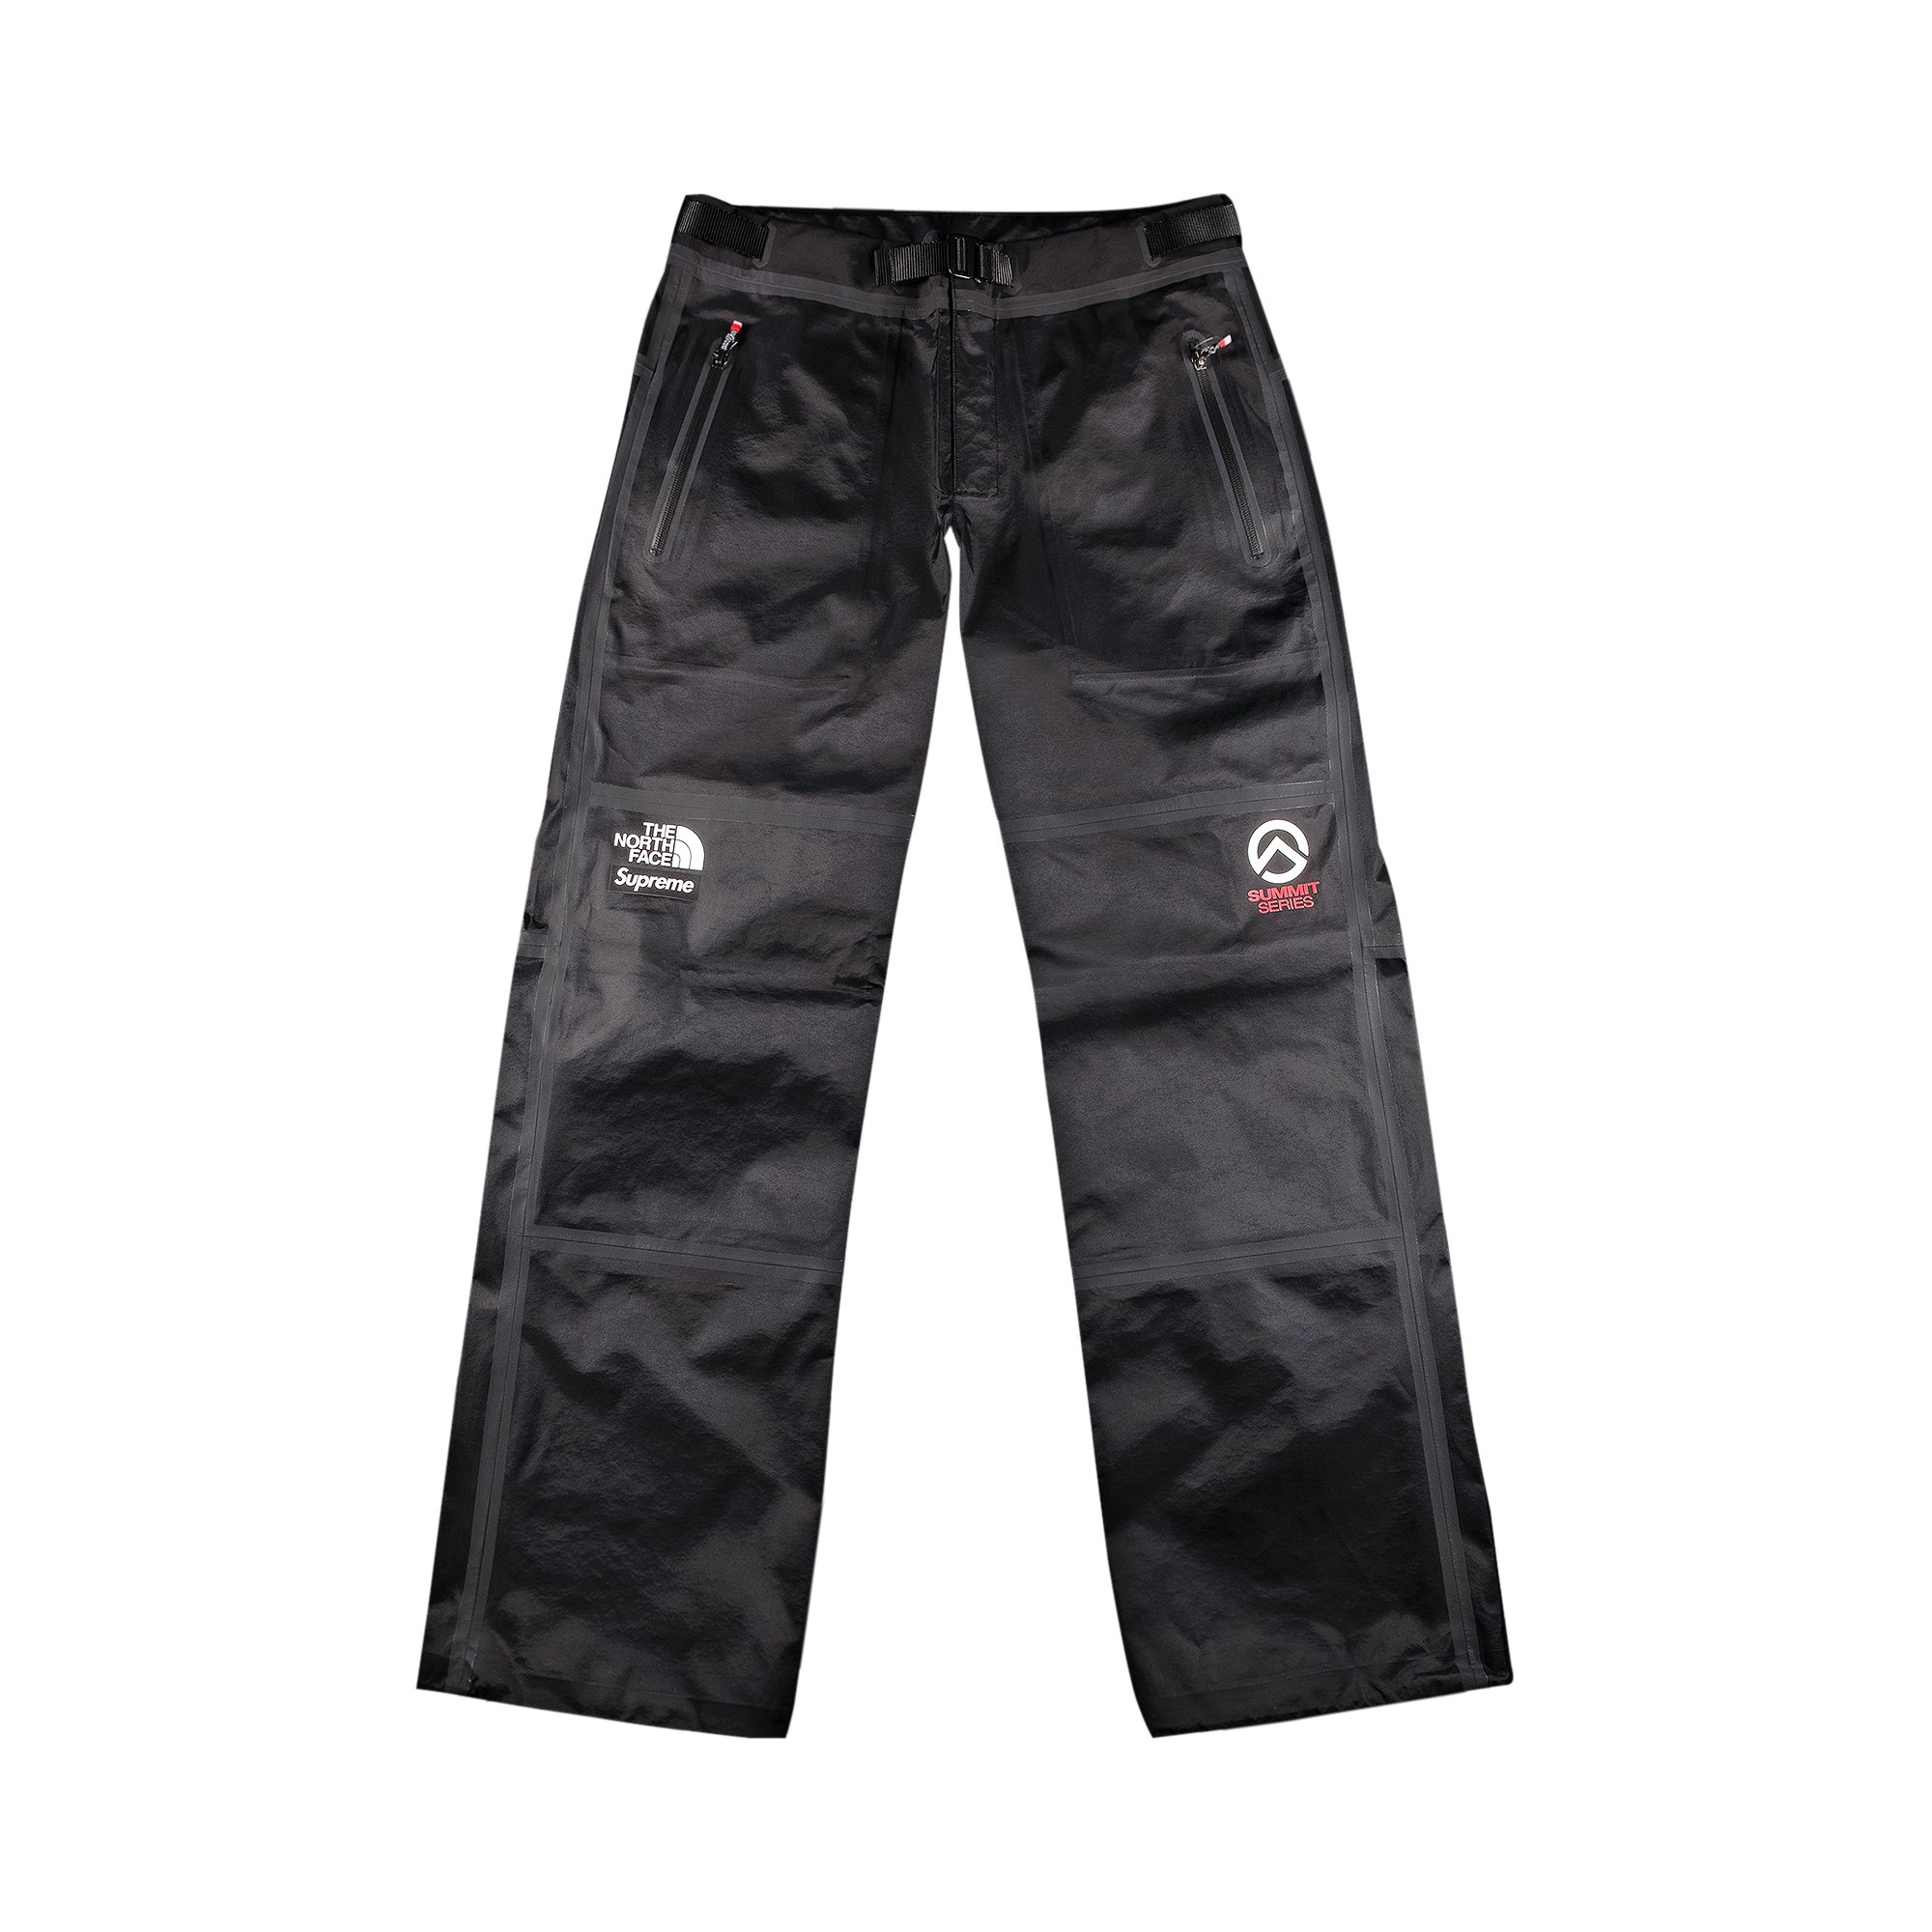 Summit Series Outer Tape Seam pants